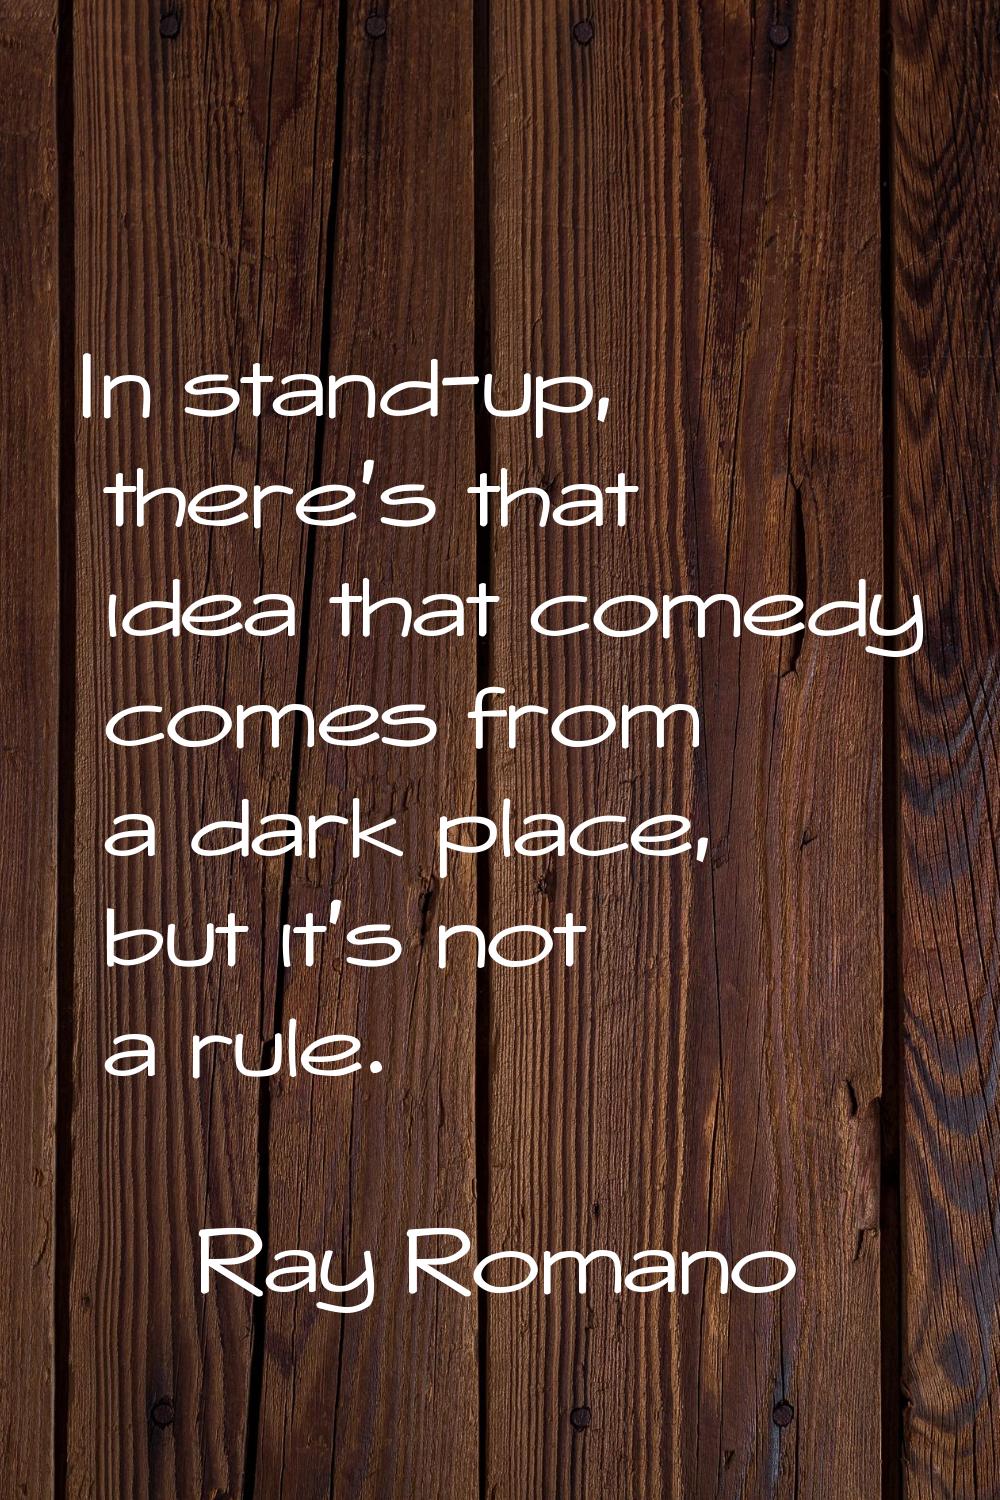 In stand-up, there's that idea that comedy comes from a dark place, but it's not a rule.